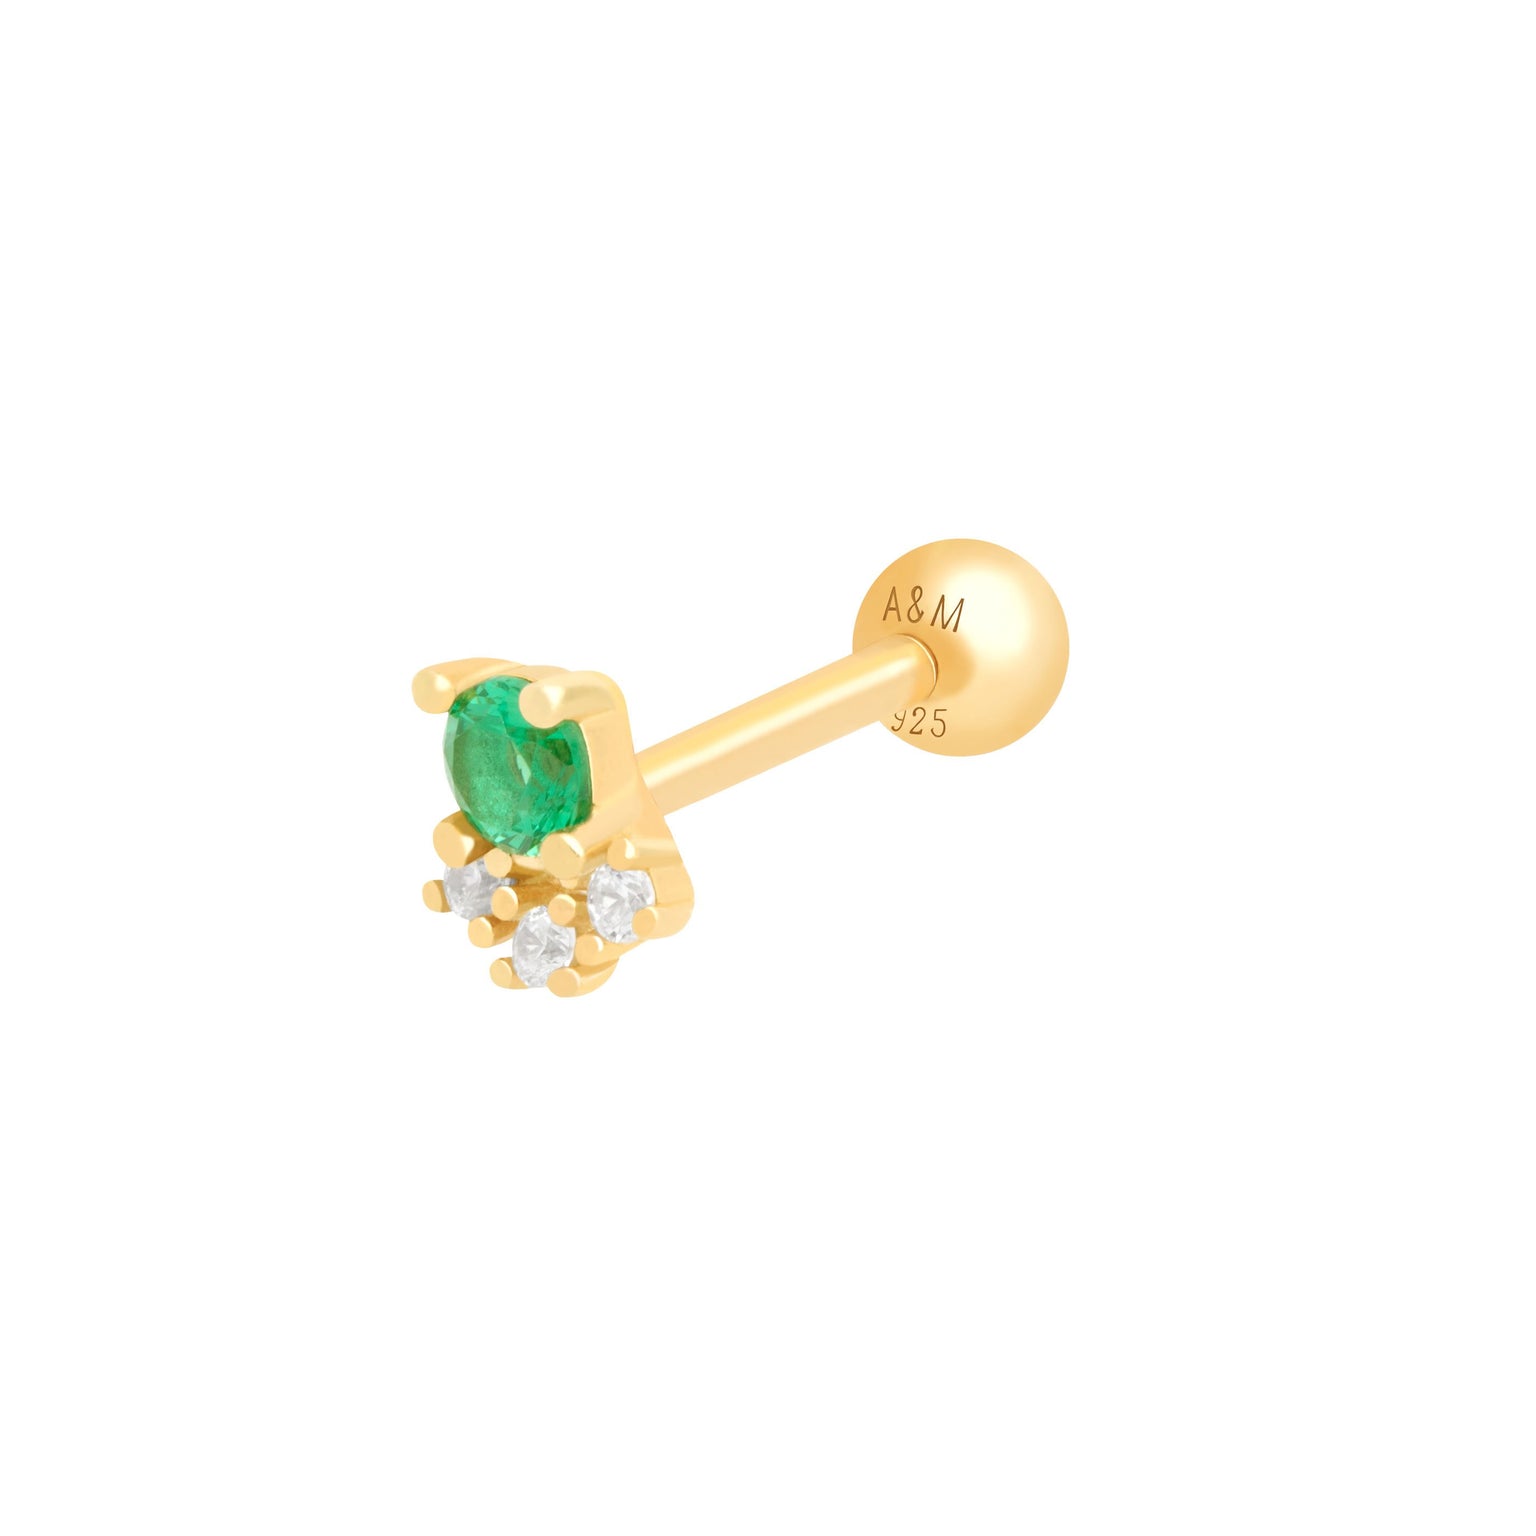 Emerald & Crystal Barbell in Gold